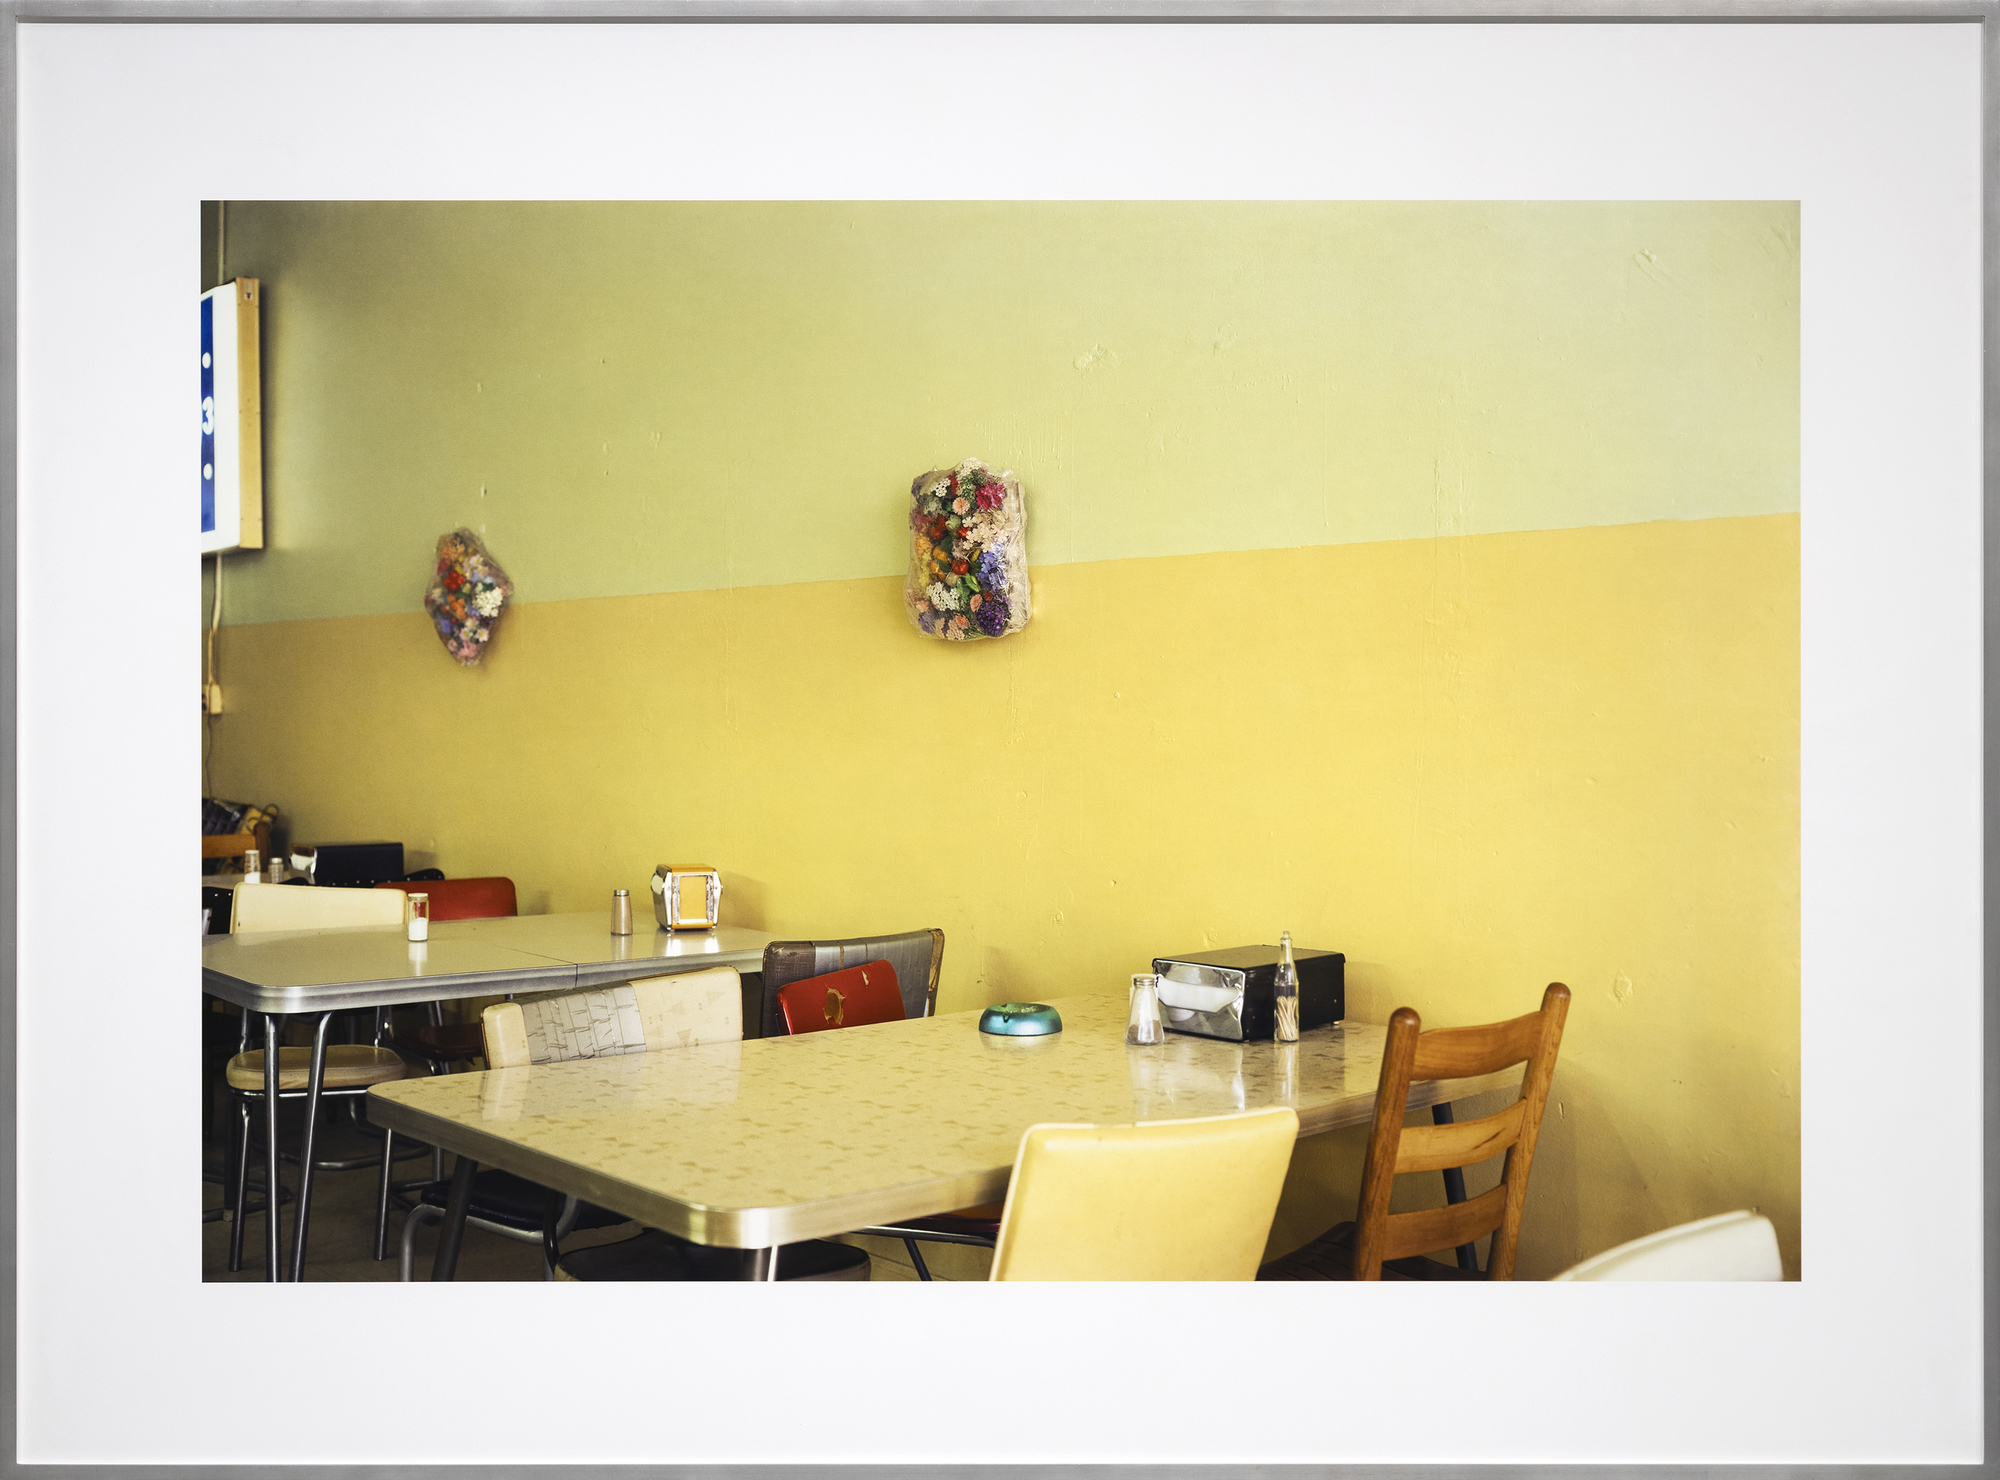 WILLIAM B. EGGLESTON - Untitled (From Election Eve) - archival pigment print - 32 1/2 x 48 1/4 in.